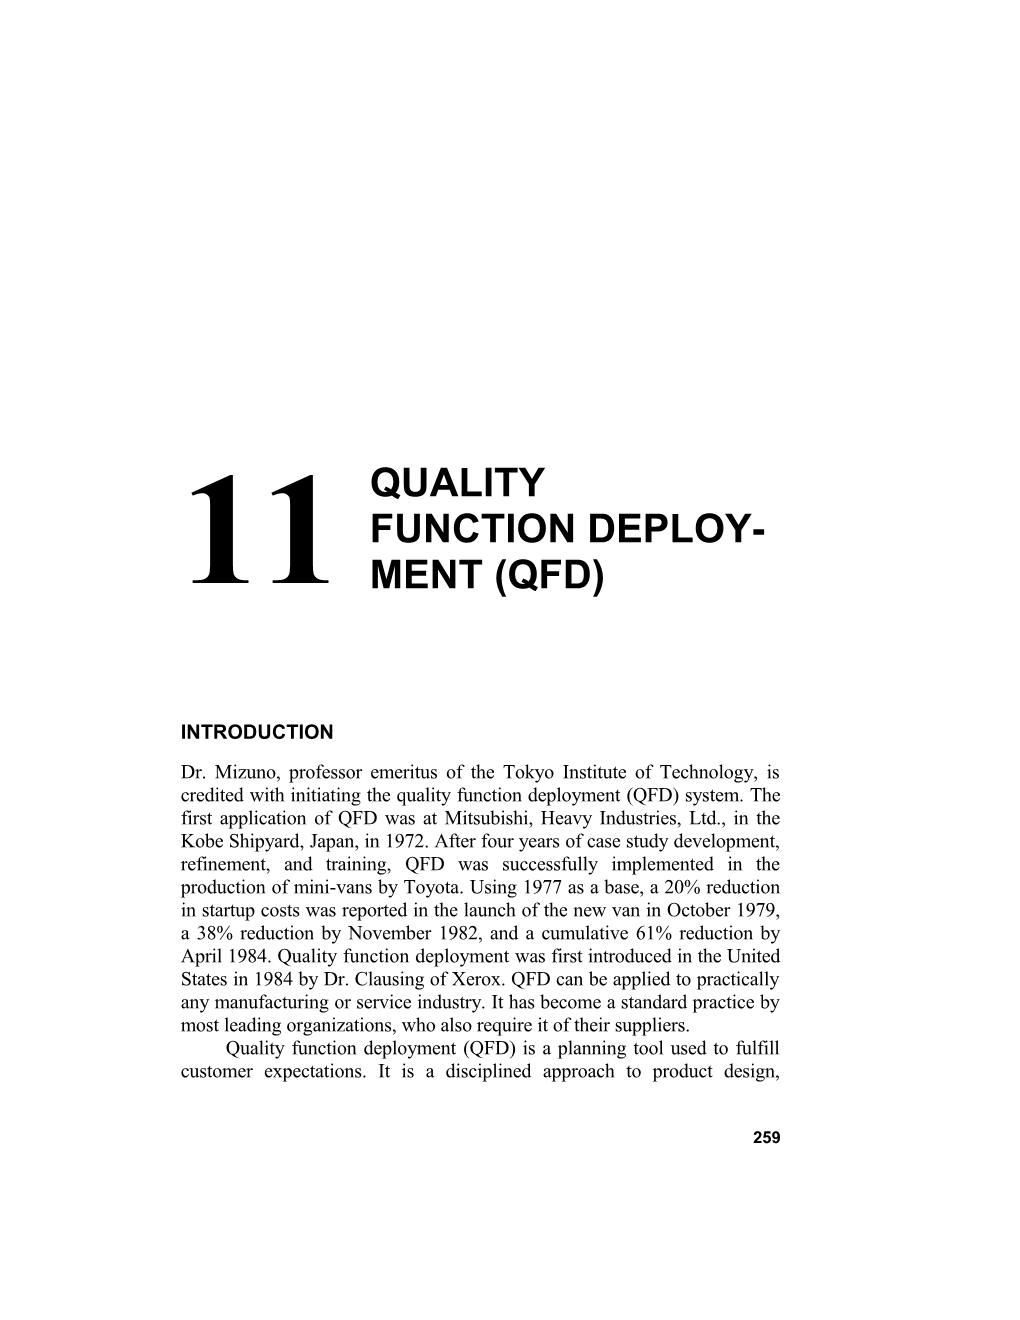 Quality Function Deployment (QFD) Is a Planning Tool Used to Fulfill Customer Expectations